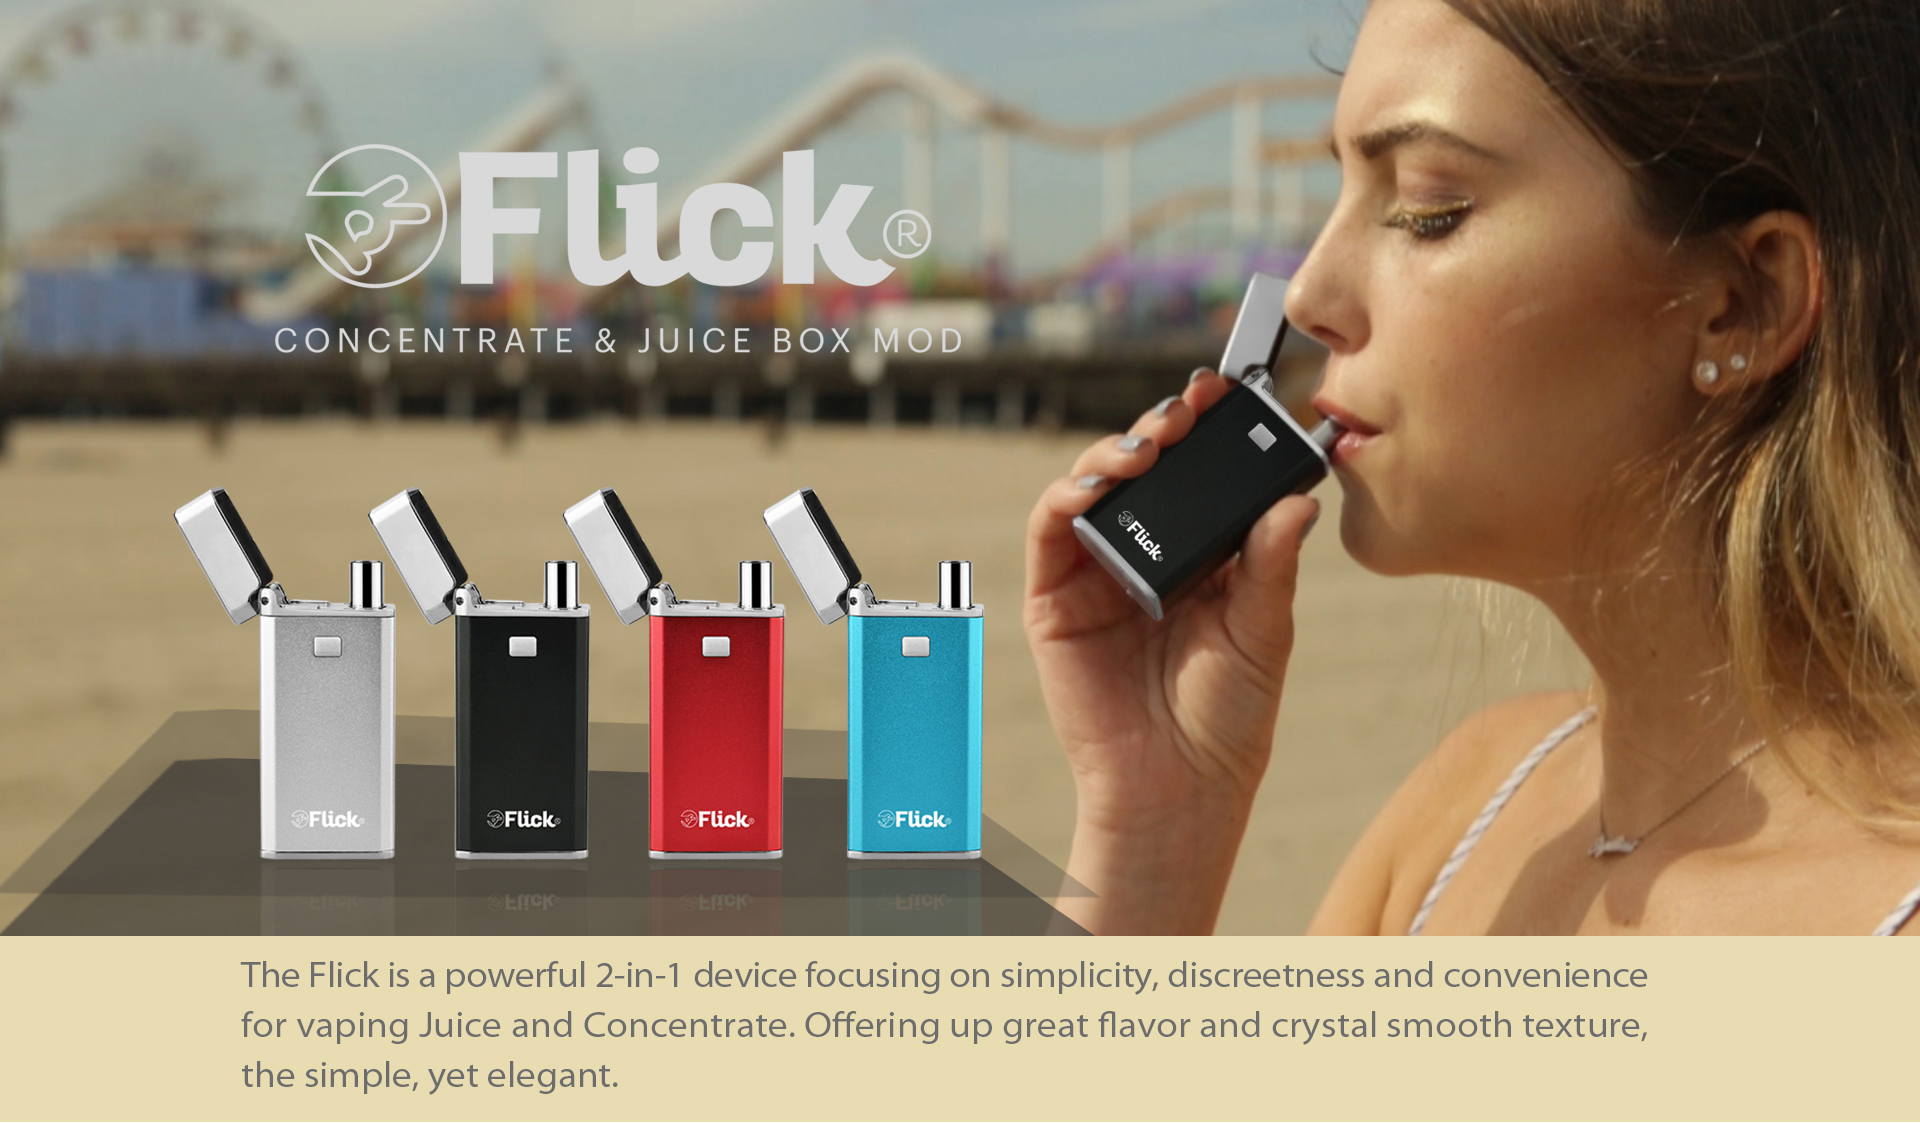 The Yocan Flick is a 2-in-1 box mod with the ability to be used with e-liquids and wax concentrates.